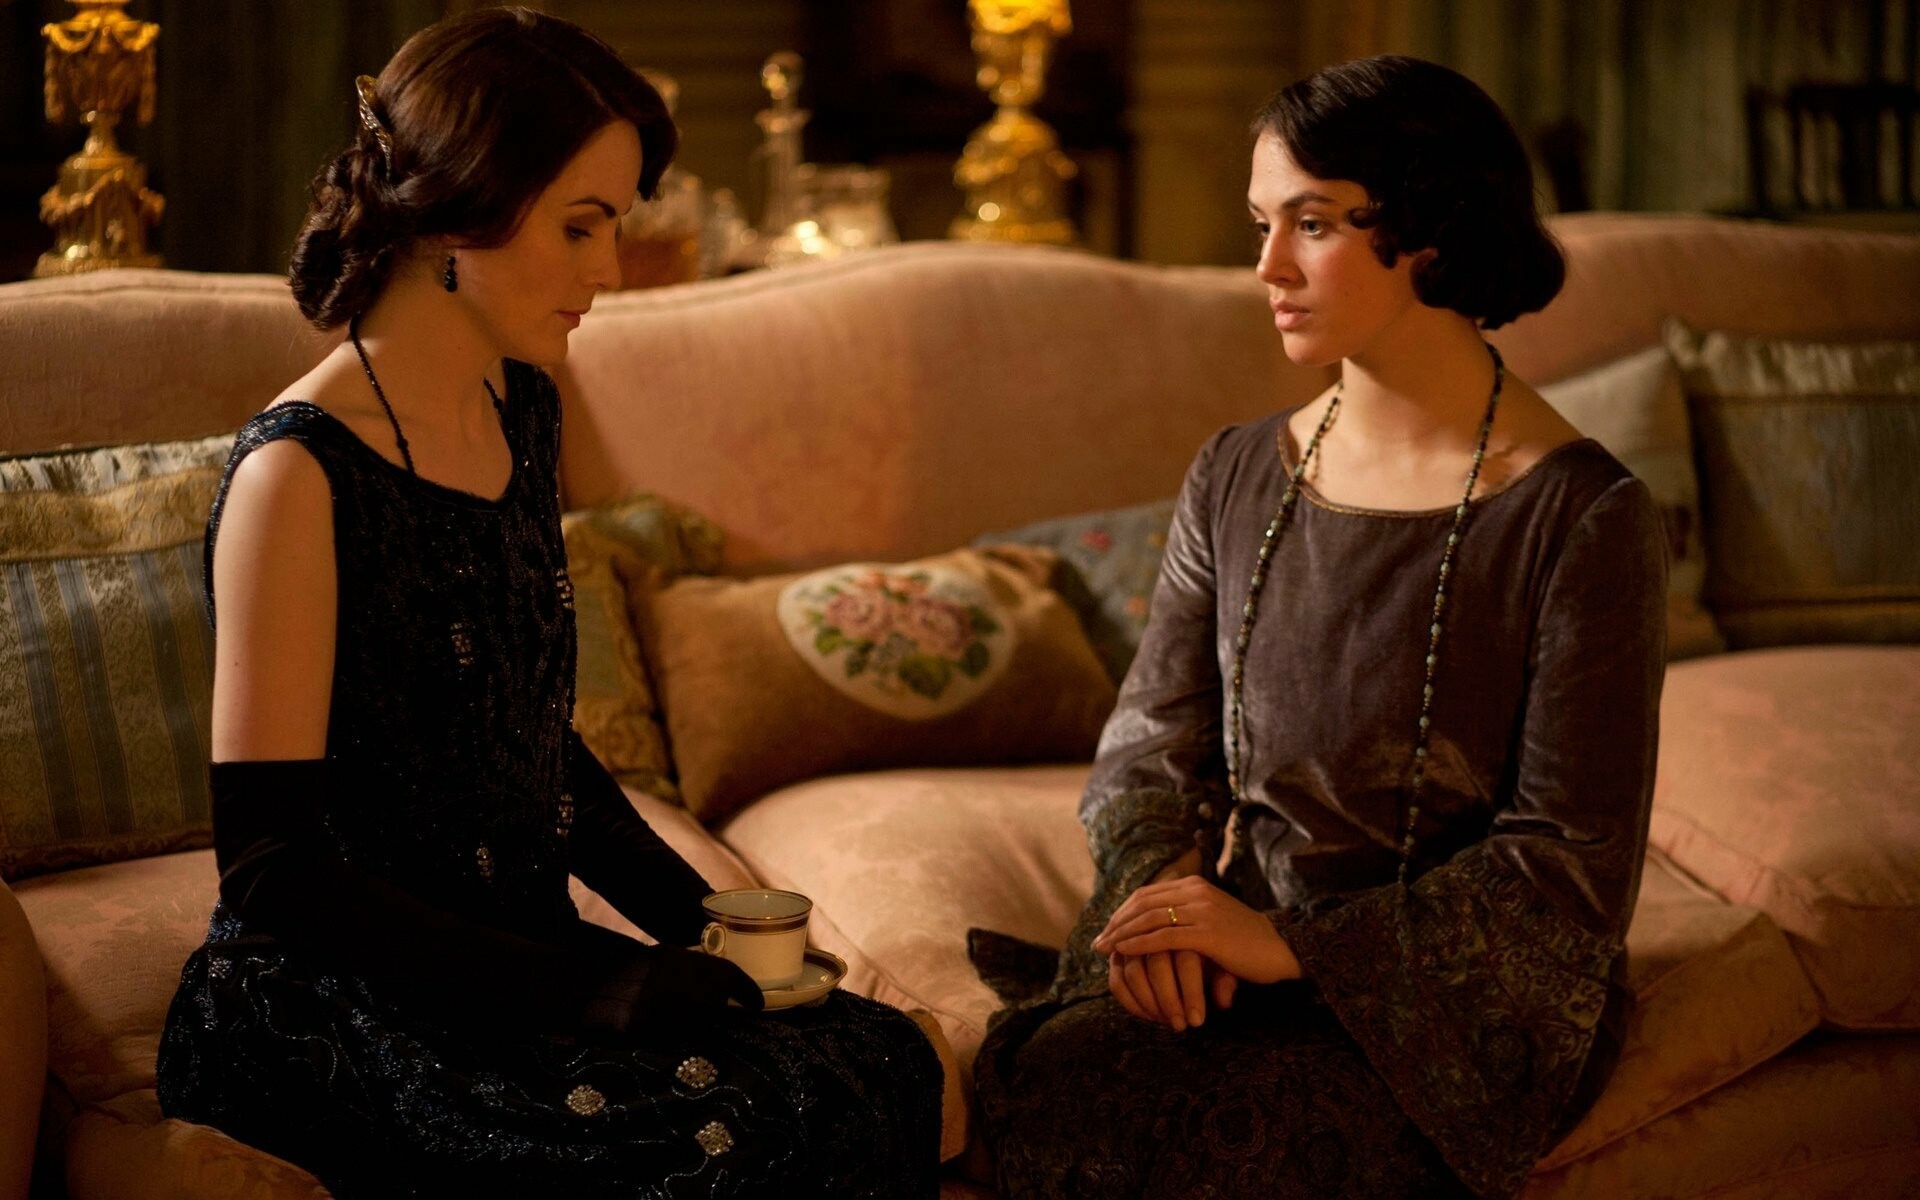 Downton Abbey: Jessica Brown Findlay as Sybil Crawley and Michelle Dockery as Mary Crowley, Actresses. 1920x1200 HD Wallpaper.